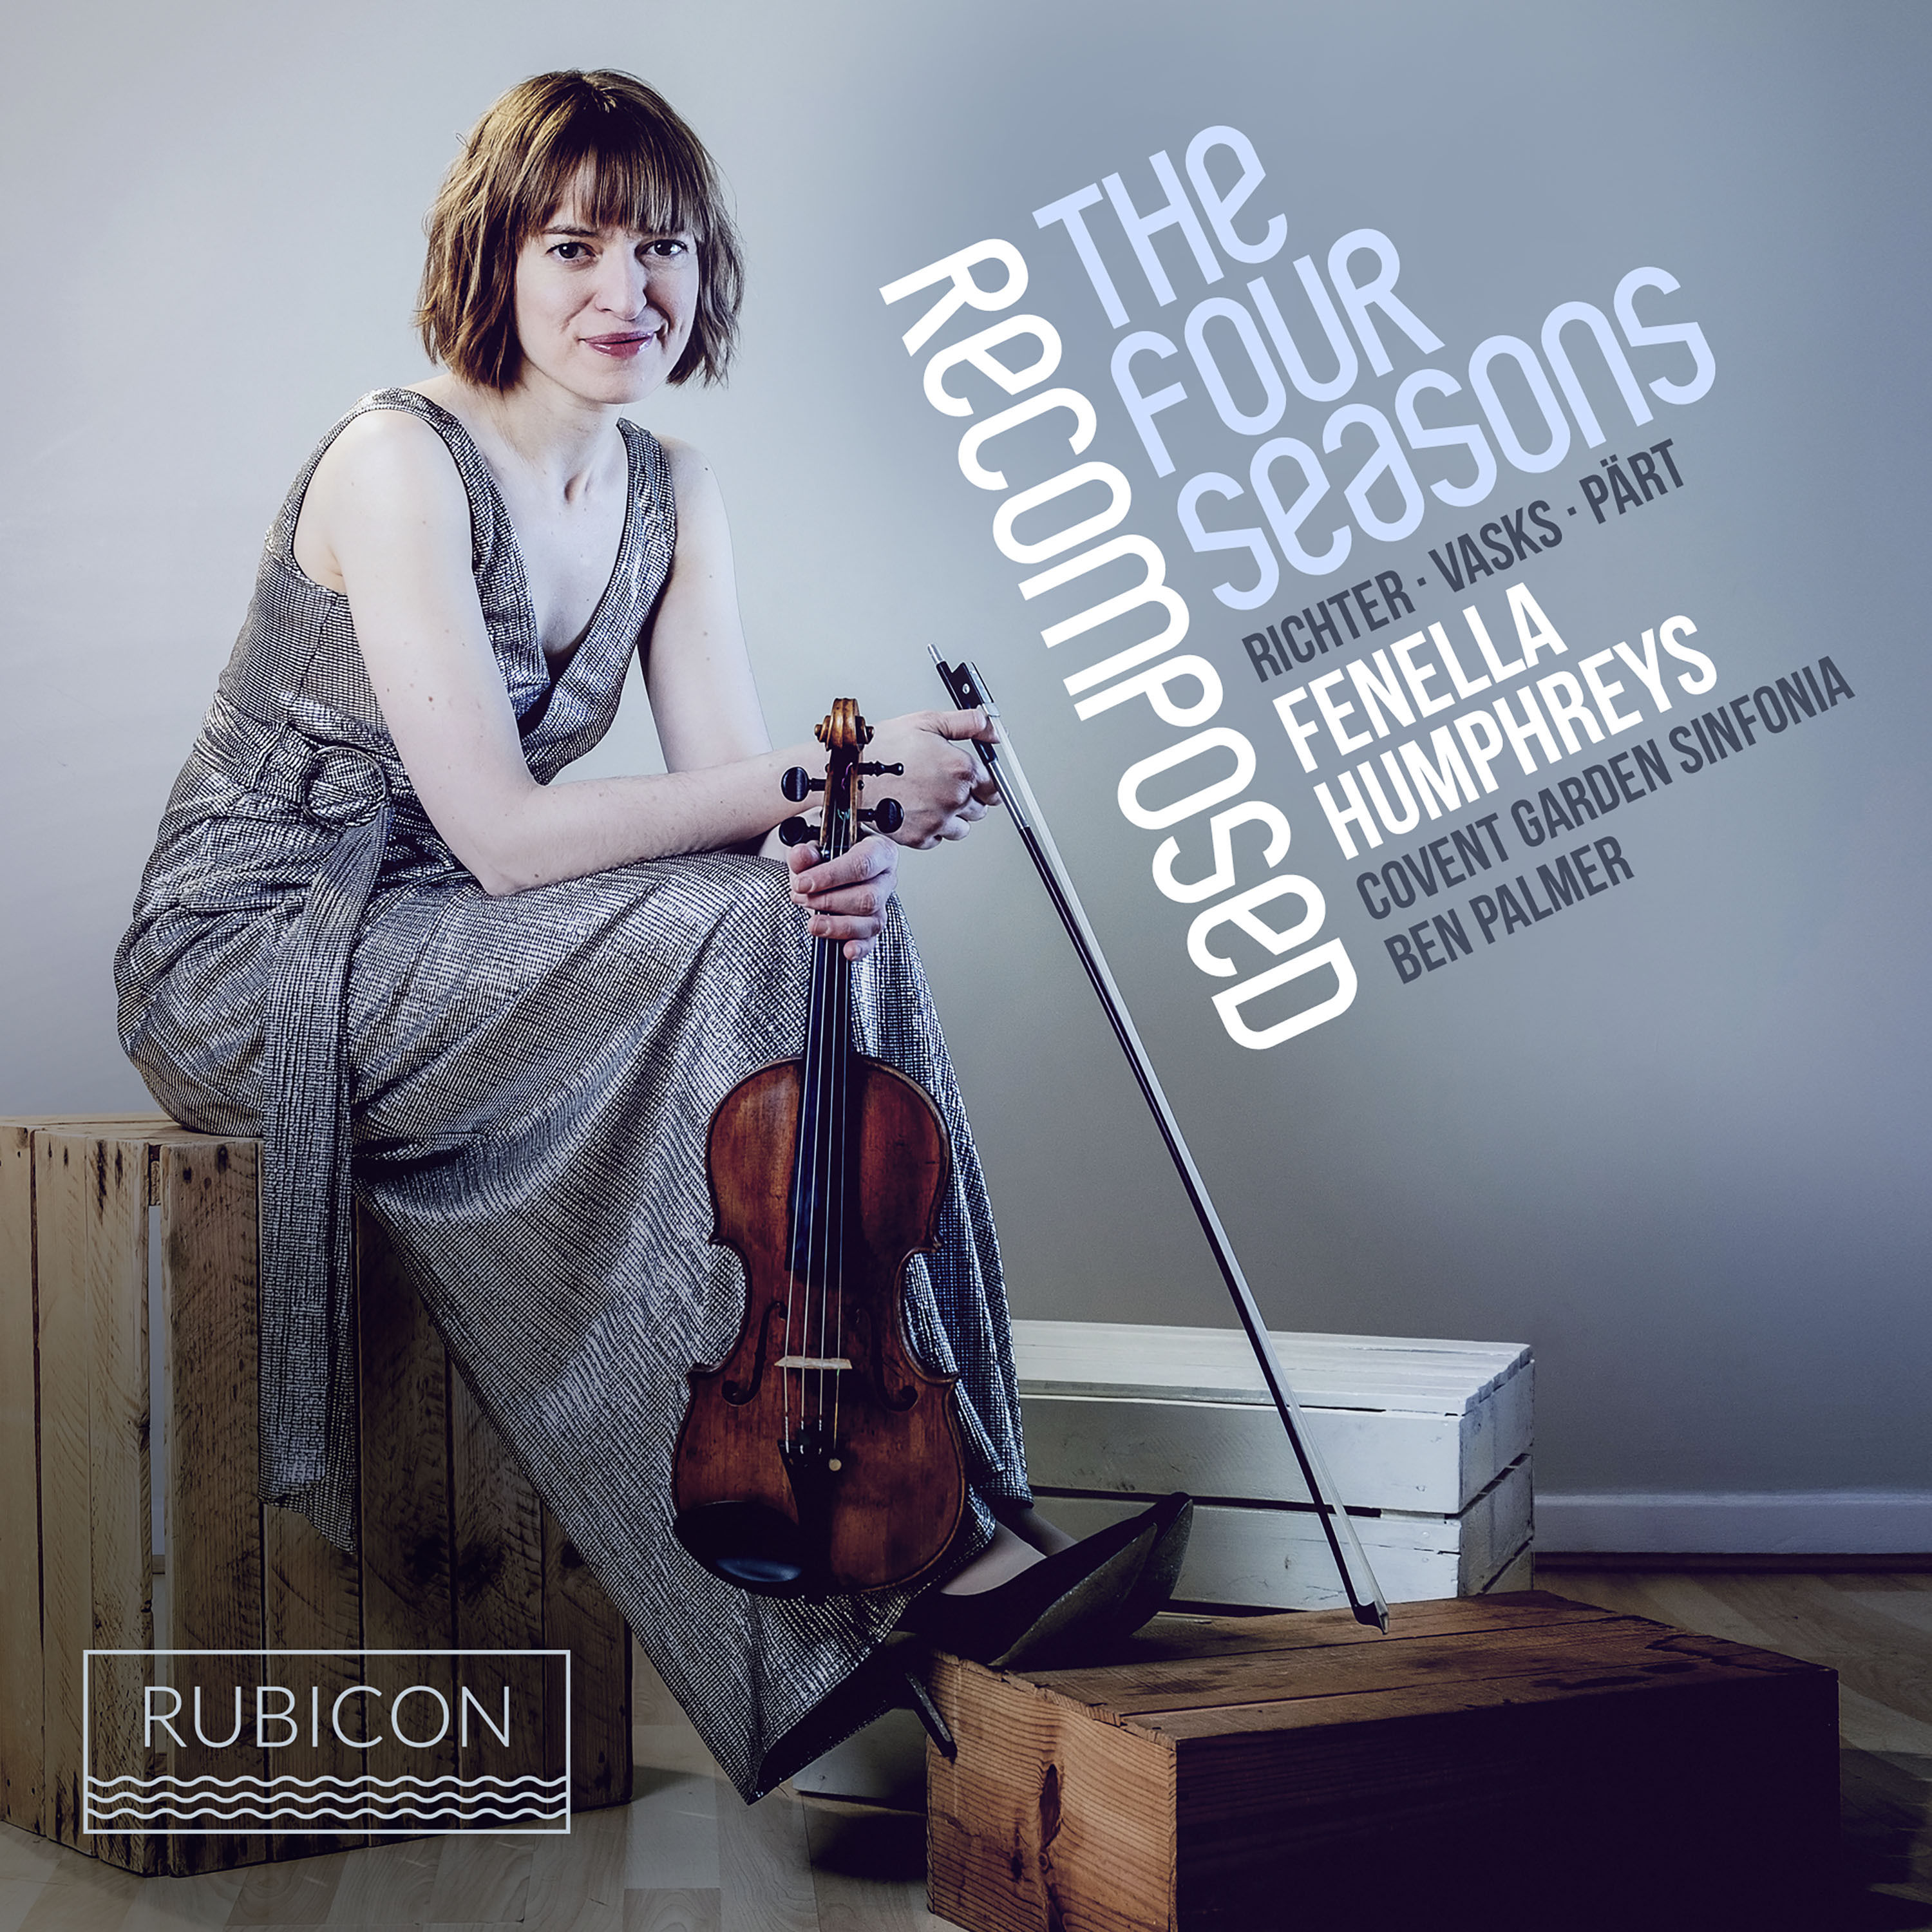 Fenella Humphreys - Vivaldi: The Four Seasons Recomposed by Max Richter (2019) [FLAC 24bit/96kHz]